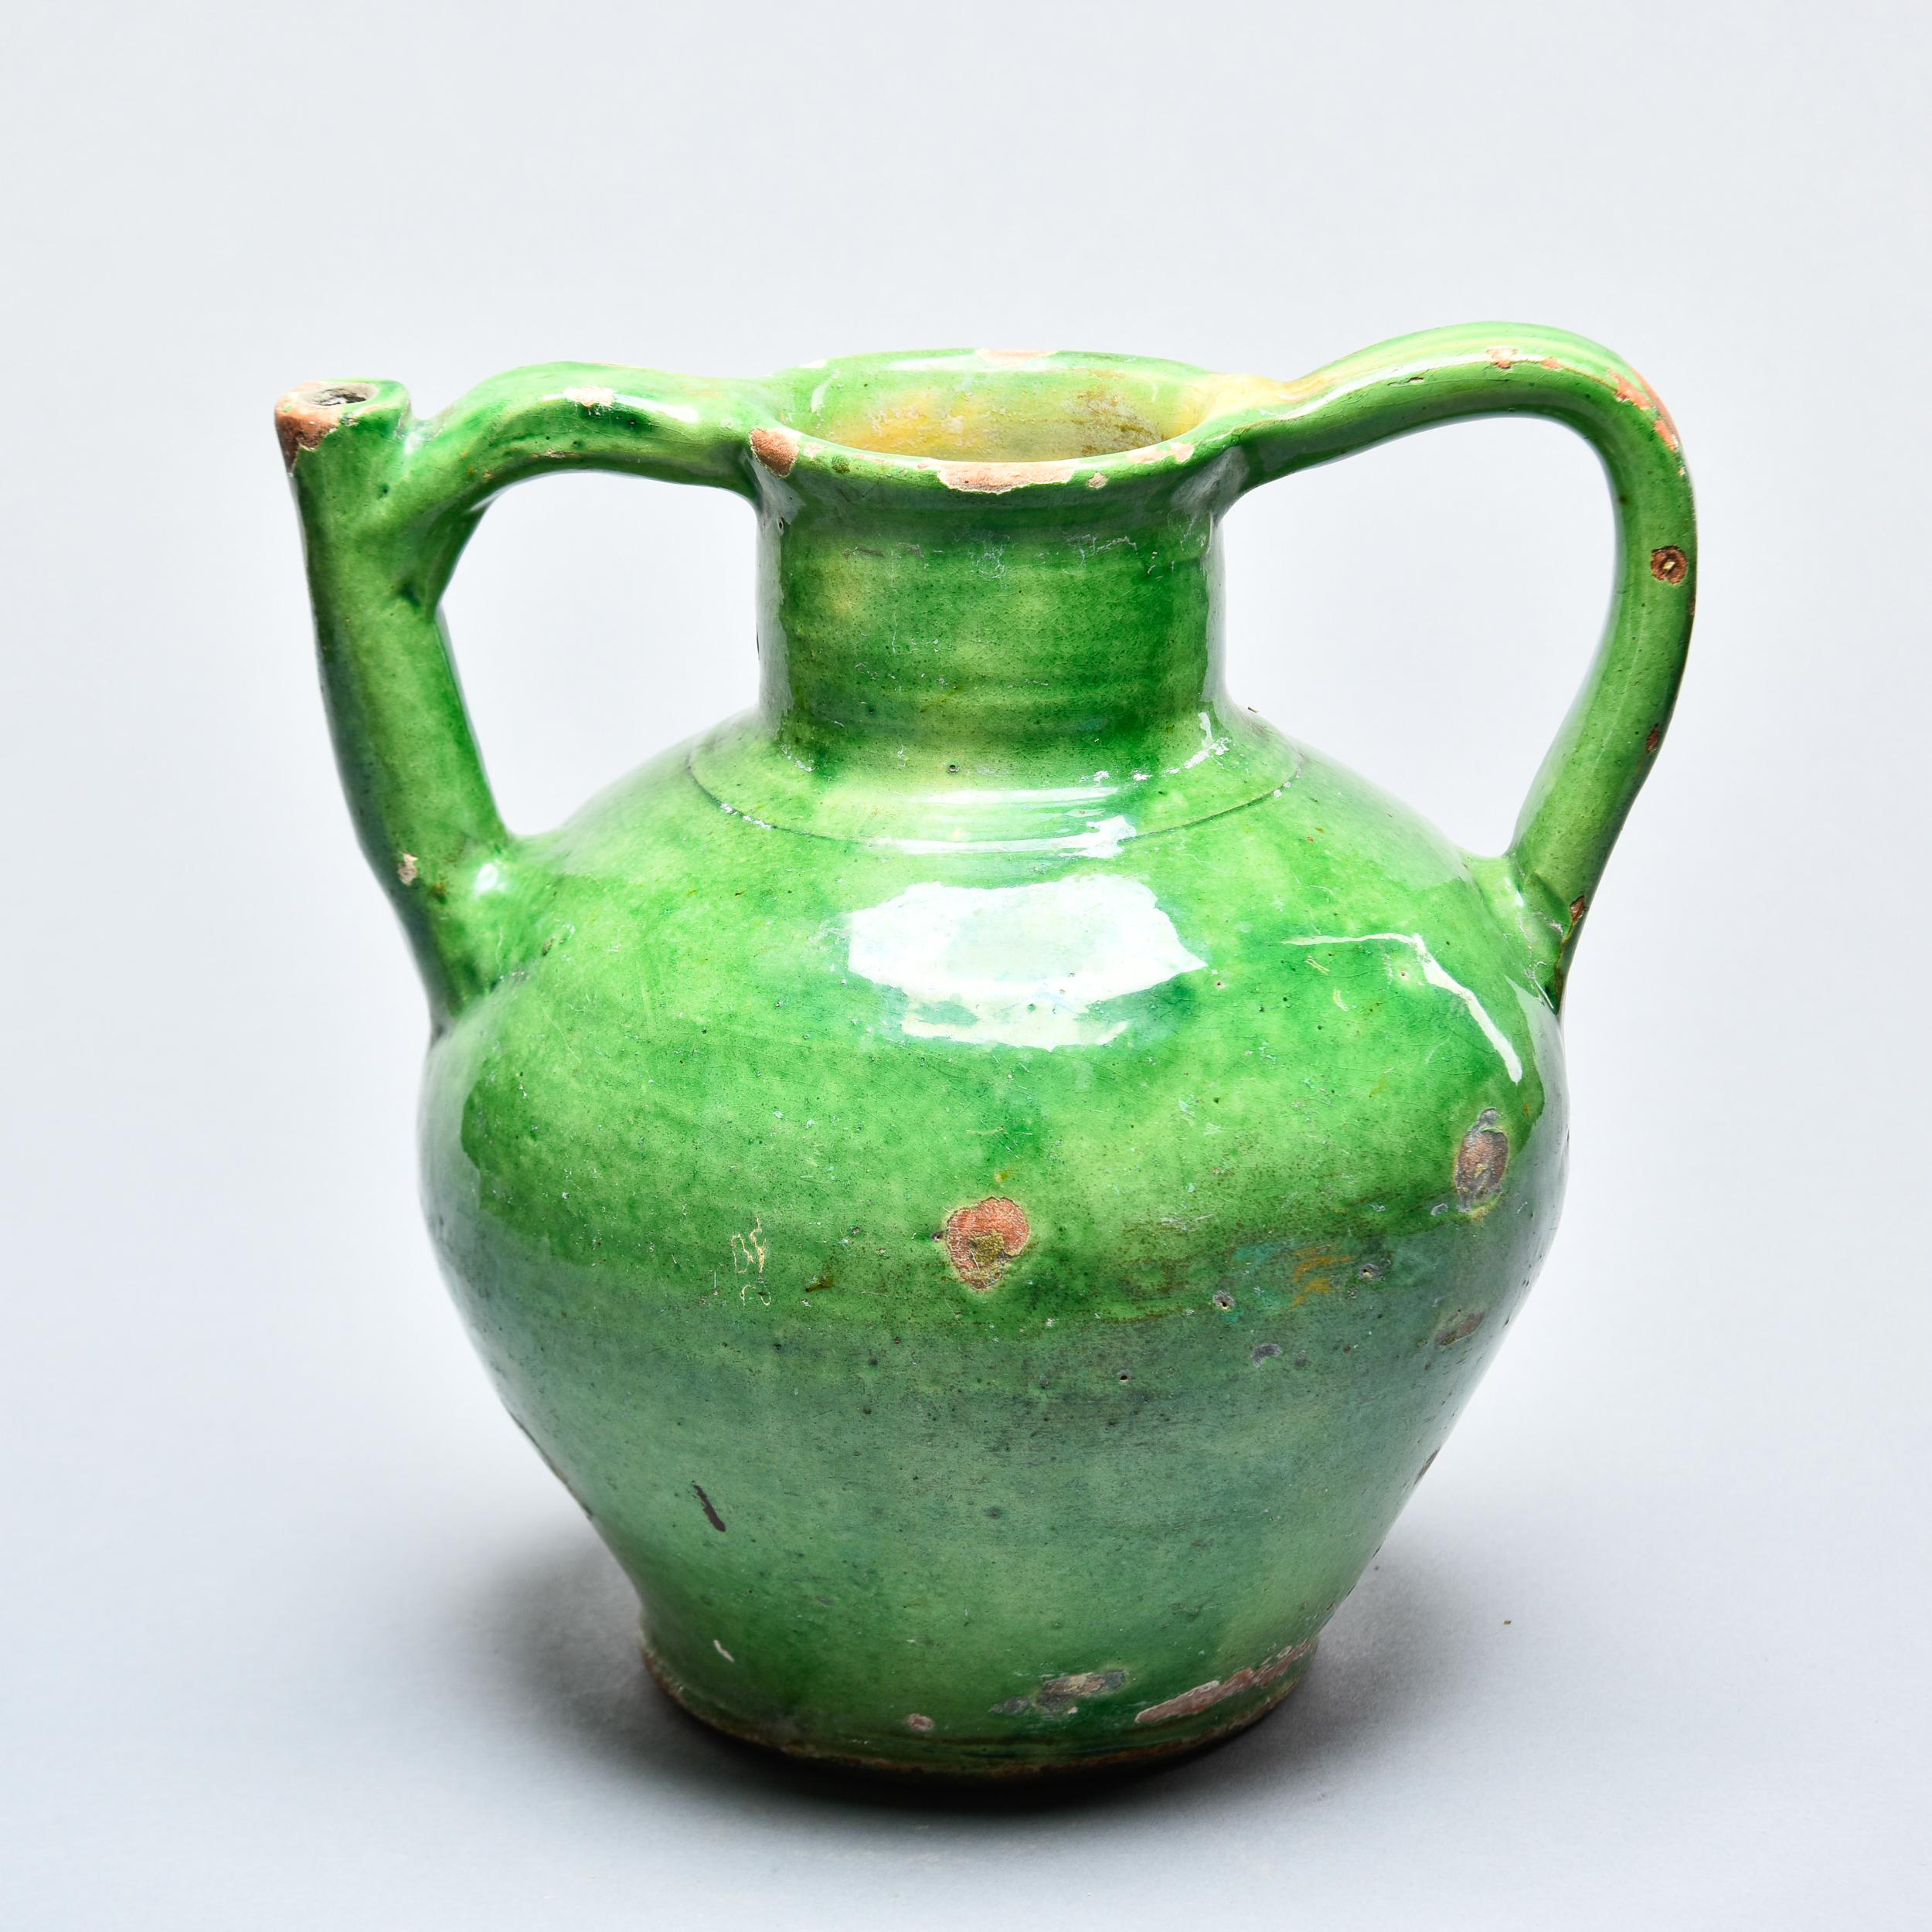 Found in France, this green glazed ceramic water jug dates from approximately 1910. Classic provincial amphora shape with one of the handles incorporating a functional pouring/filling spout. This most likely had a wooden lid at one point. Makes a